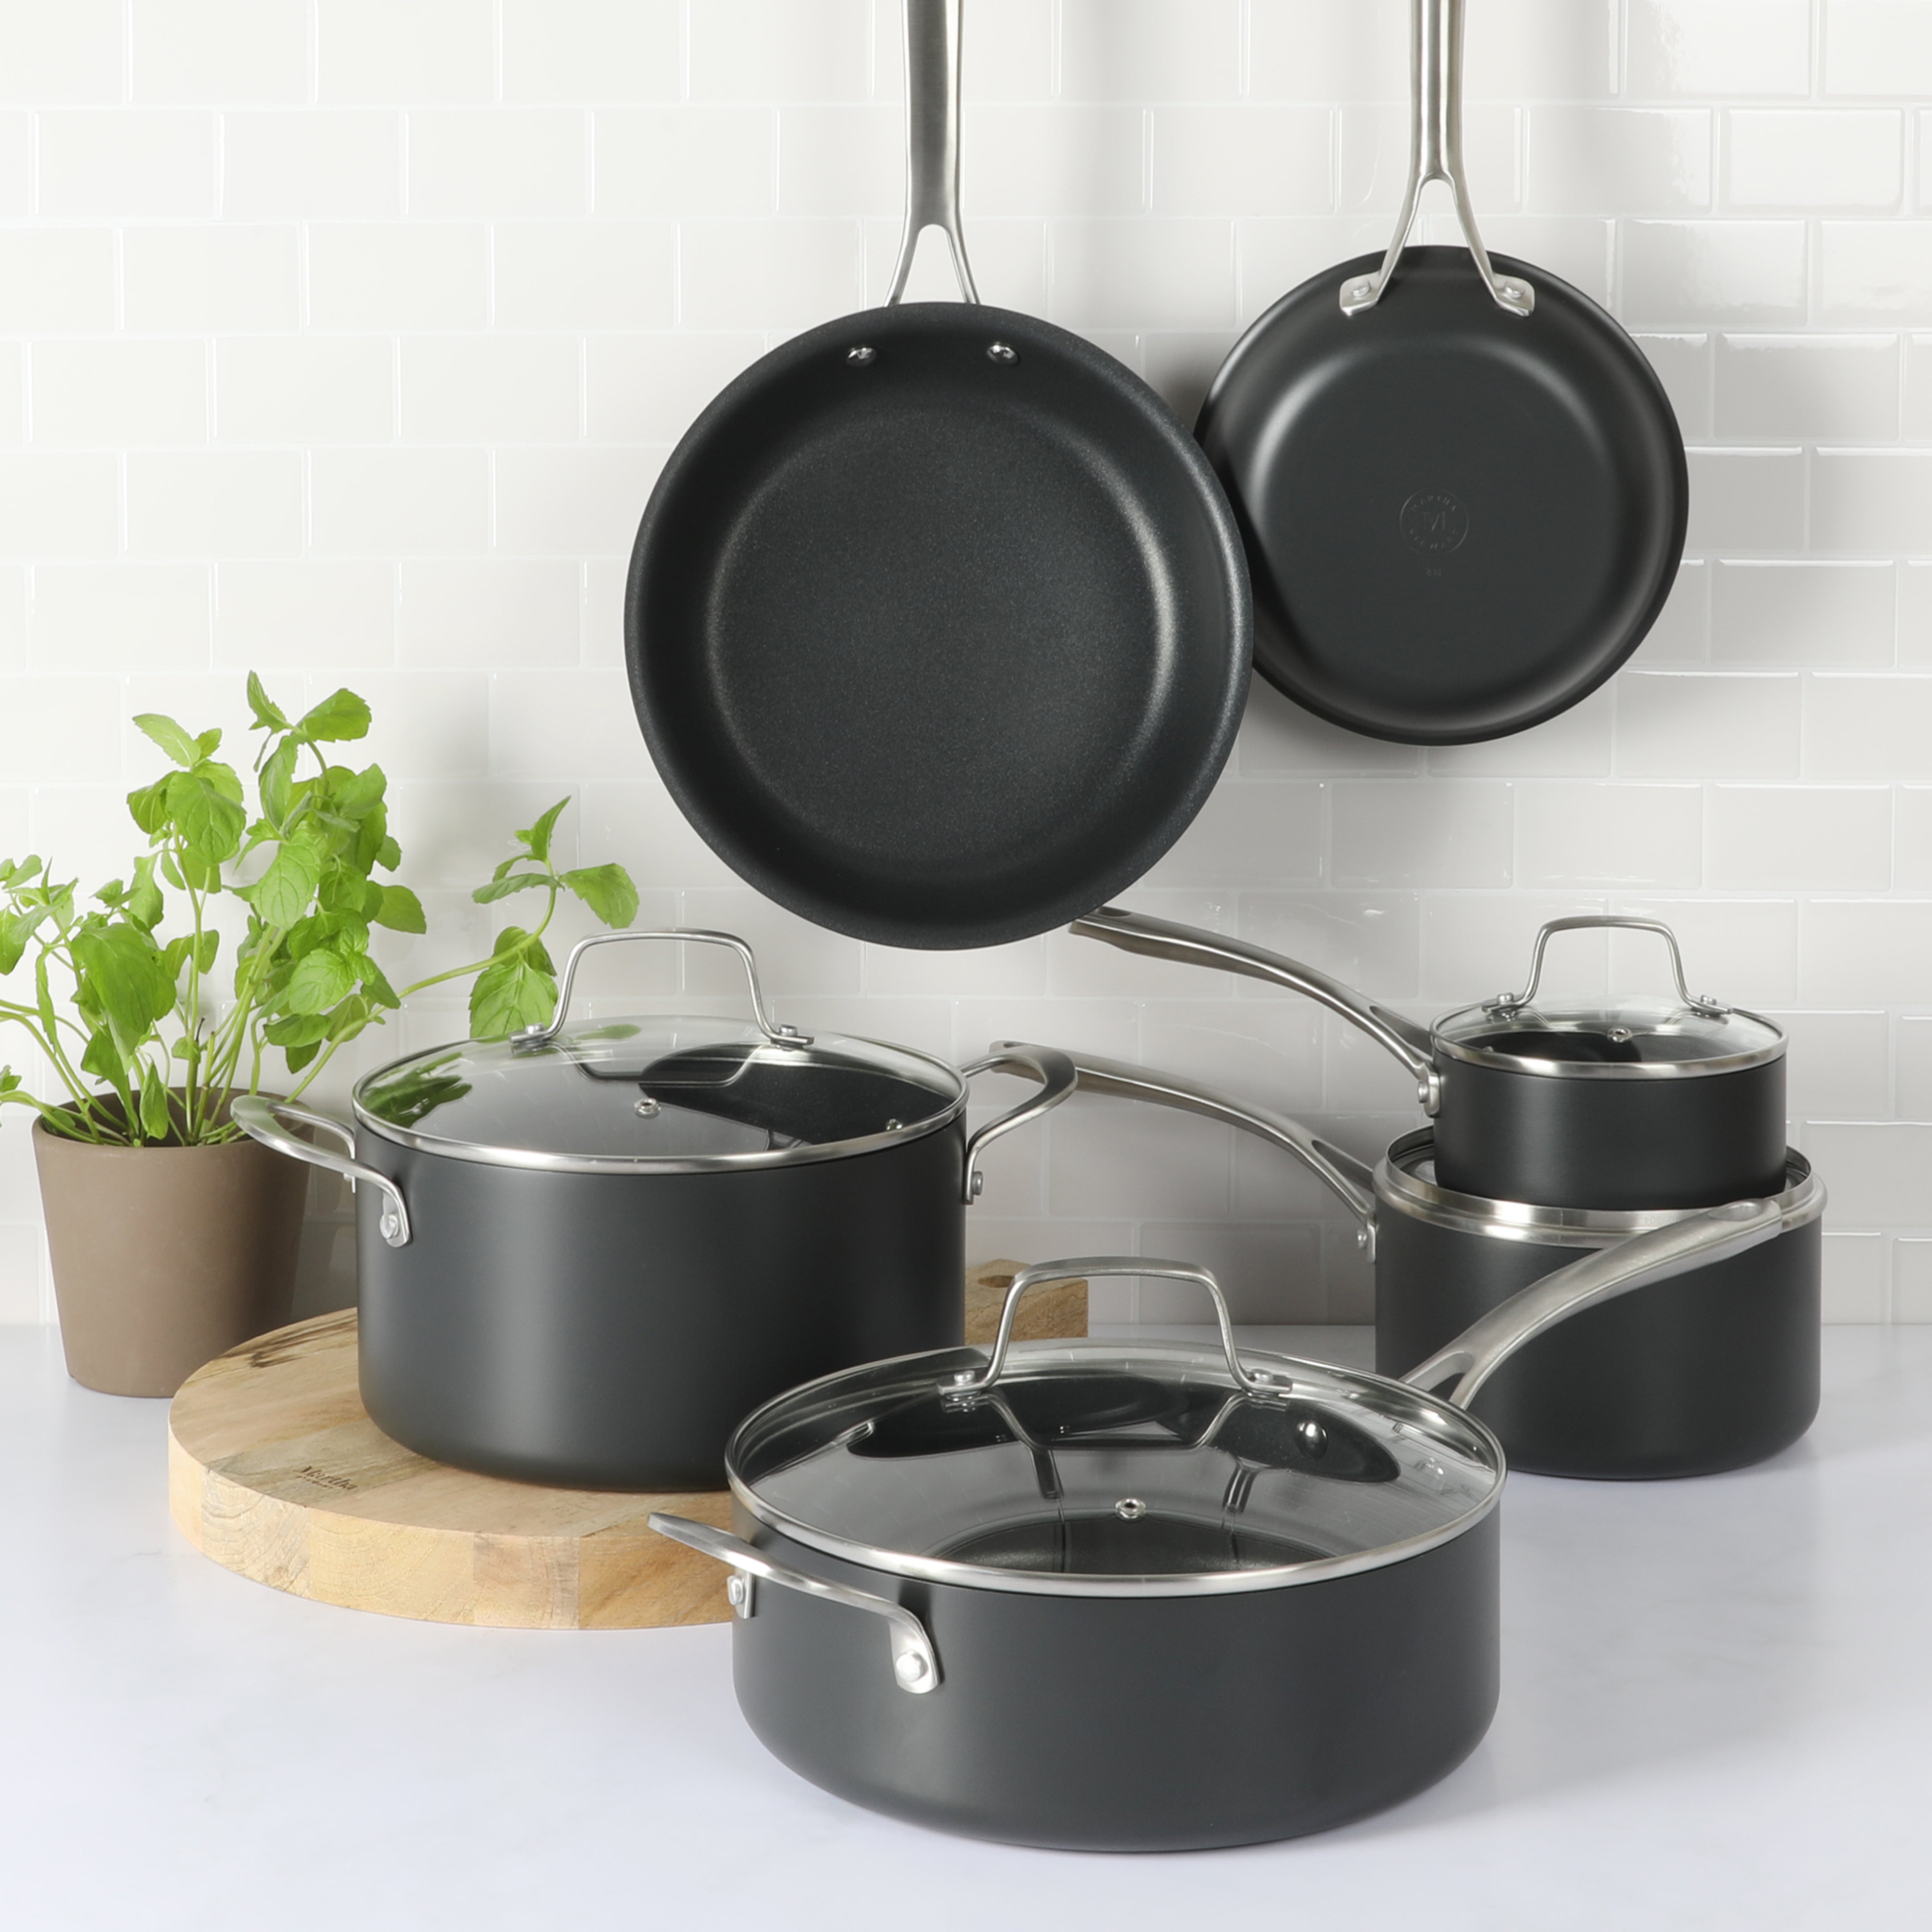 Signature Stainless Steel 10-Piece Cookware Set